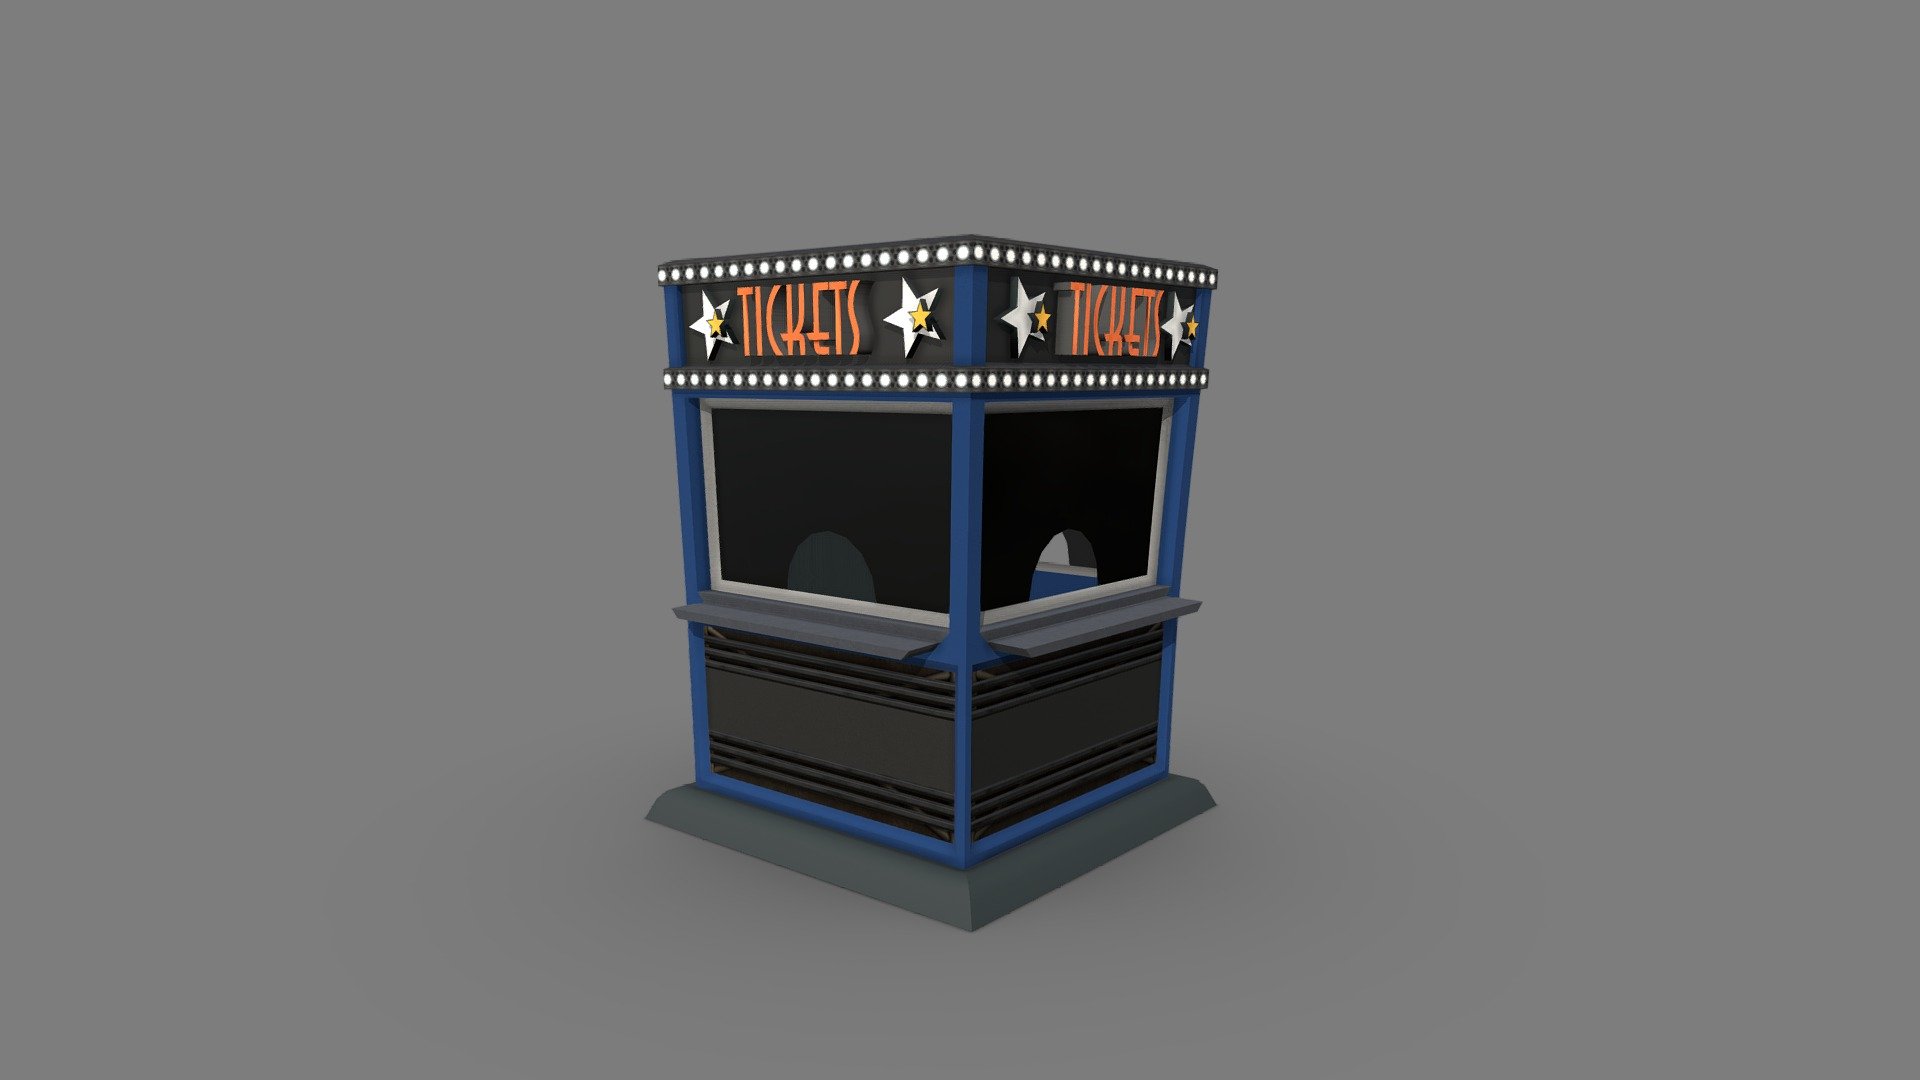 Ticket booth for amusement park attractions. This model is part of our amusement park pack that you can fin in our profile 3d model